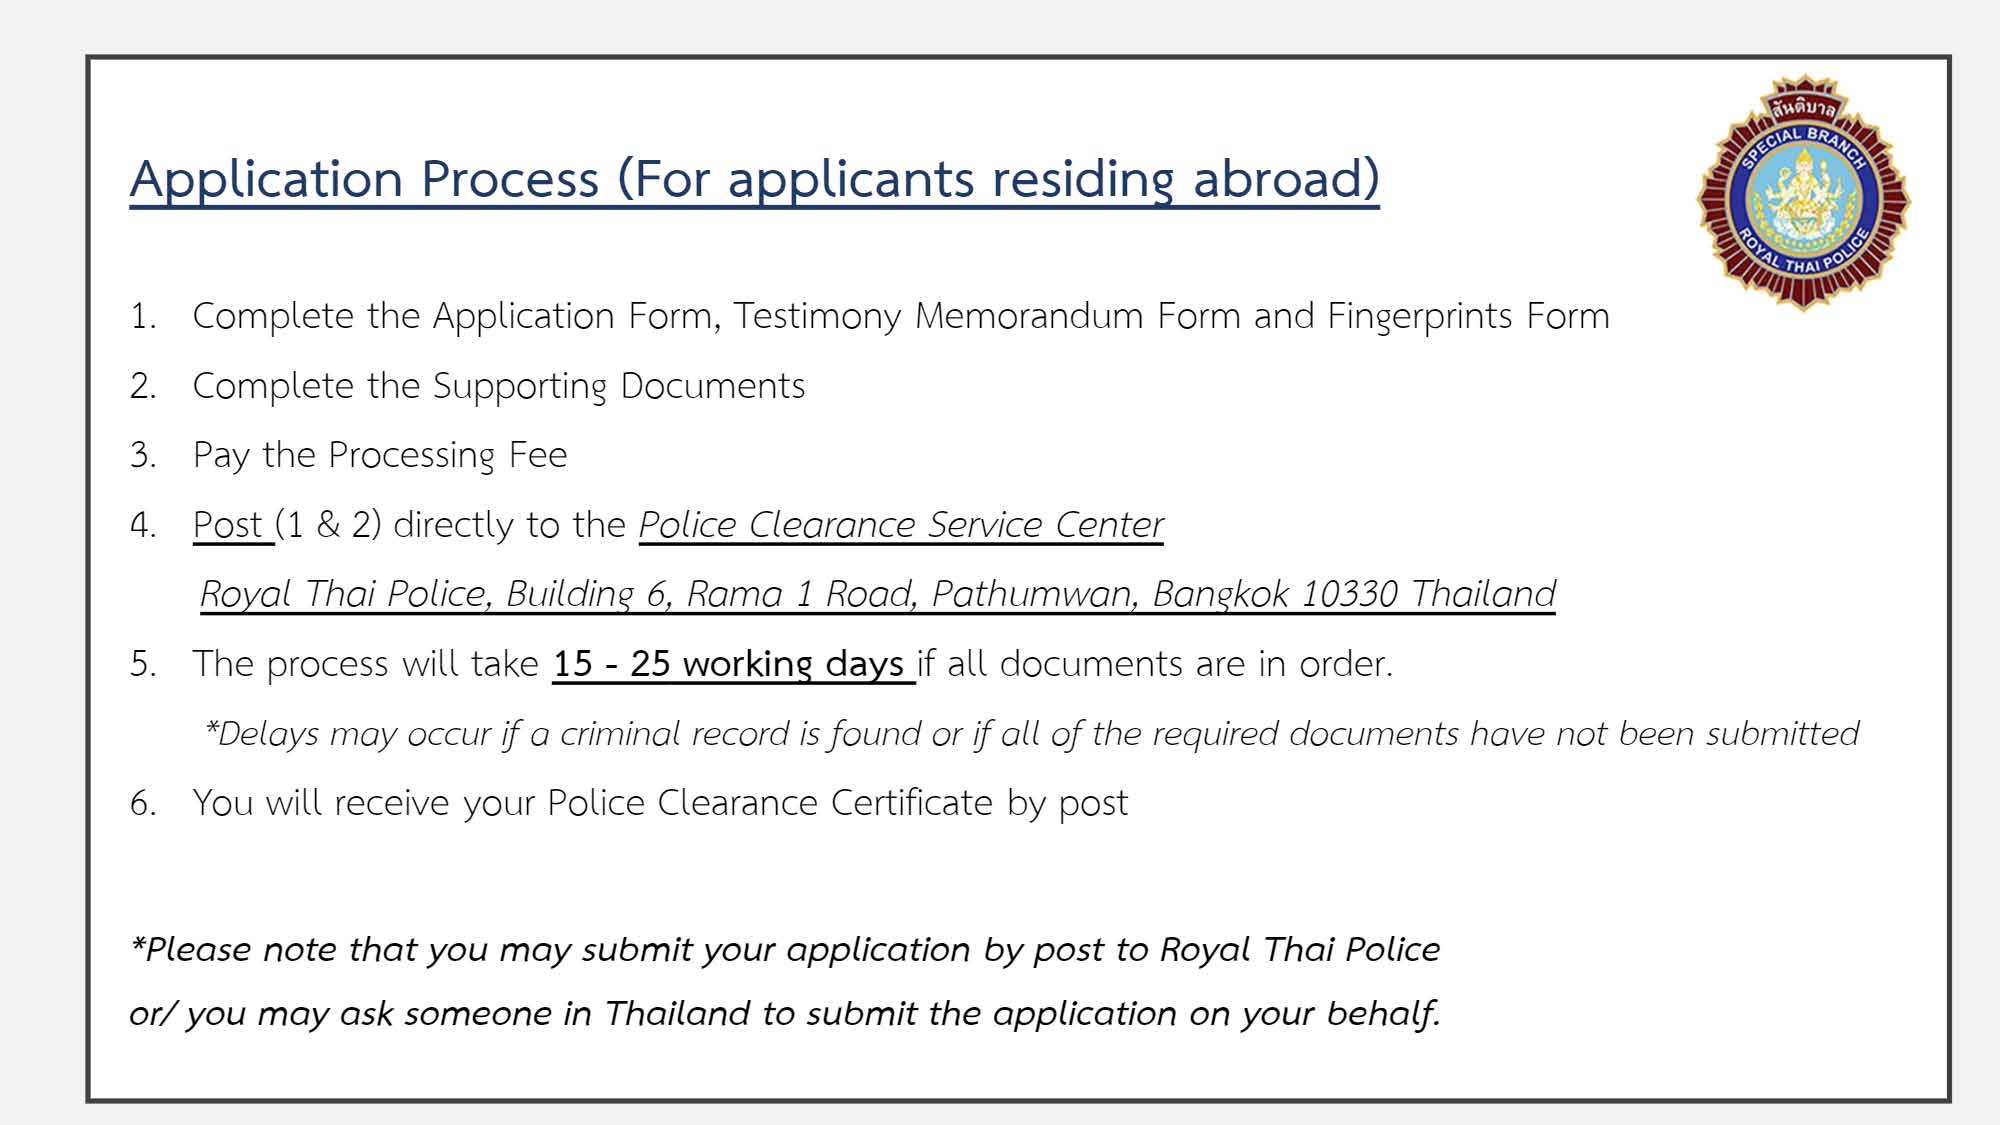 Request_for_a_Police_Clearance_Certificate_from_Thailand___FOR_APPLICANT_RESIDING_ABOARD_Page_2